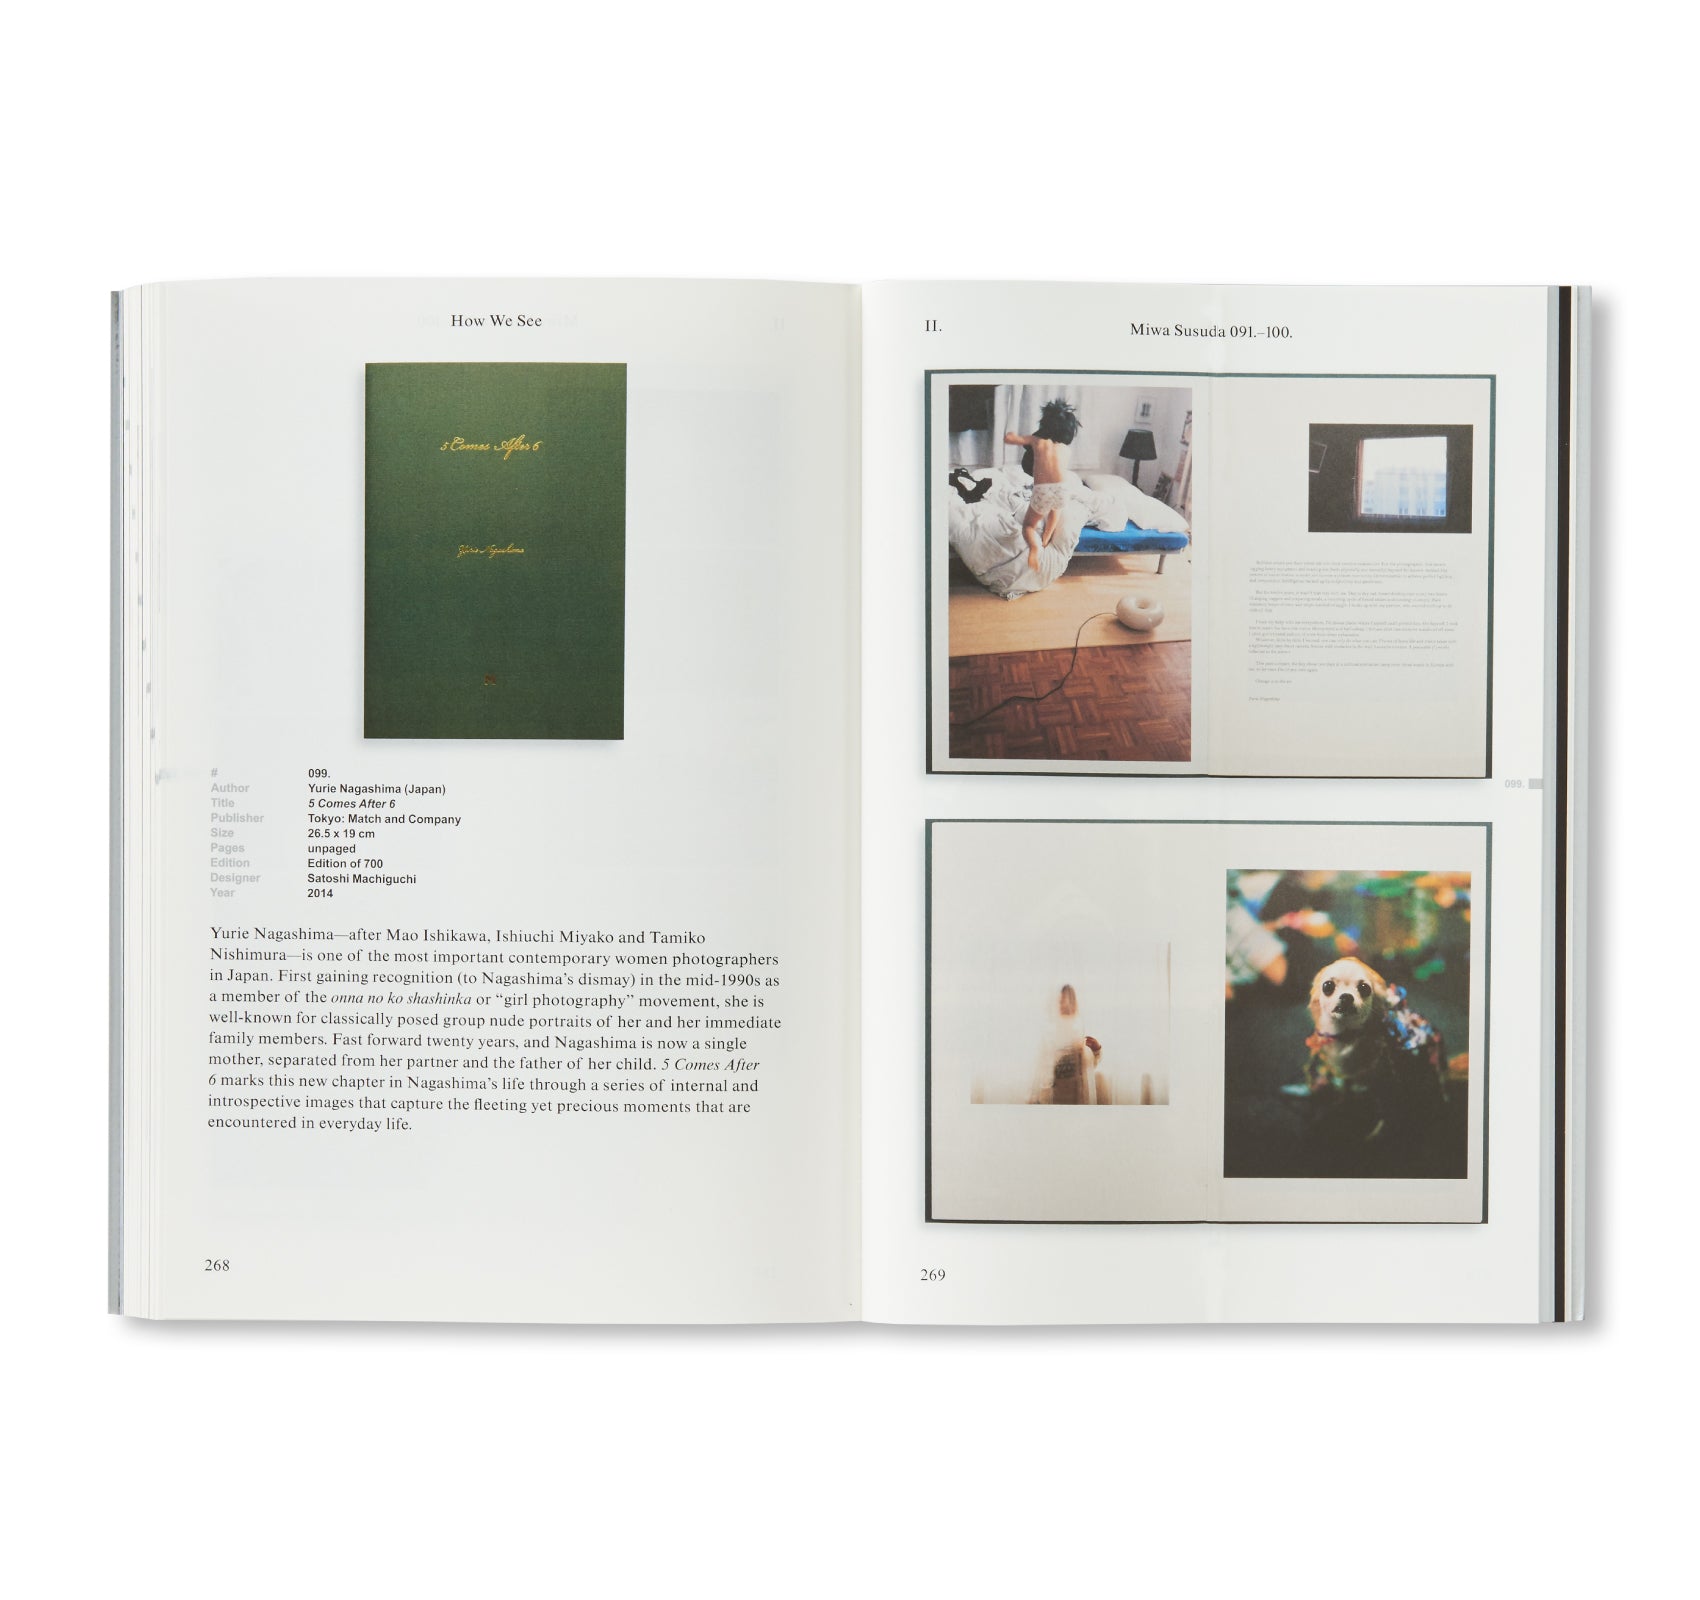 HOW WE SEE: PHOTOBOOKS BY WOMEN